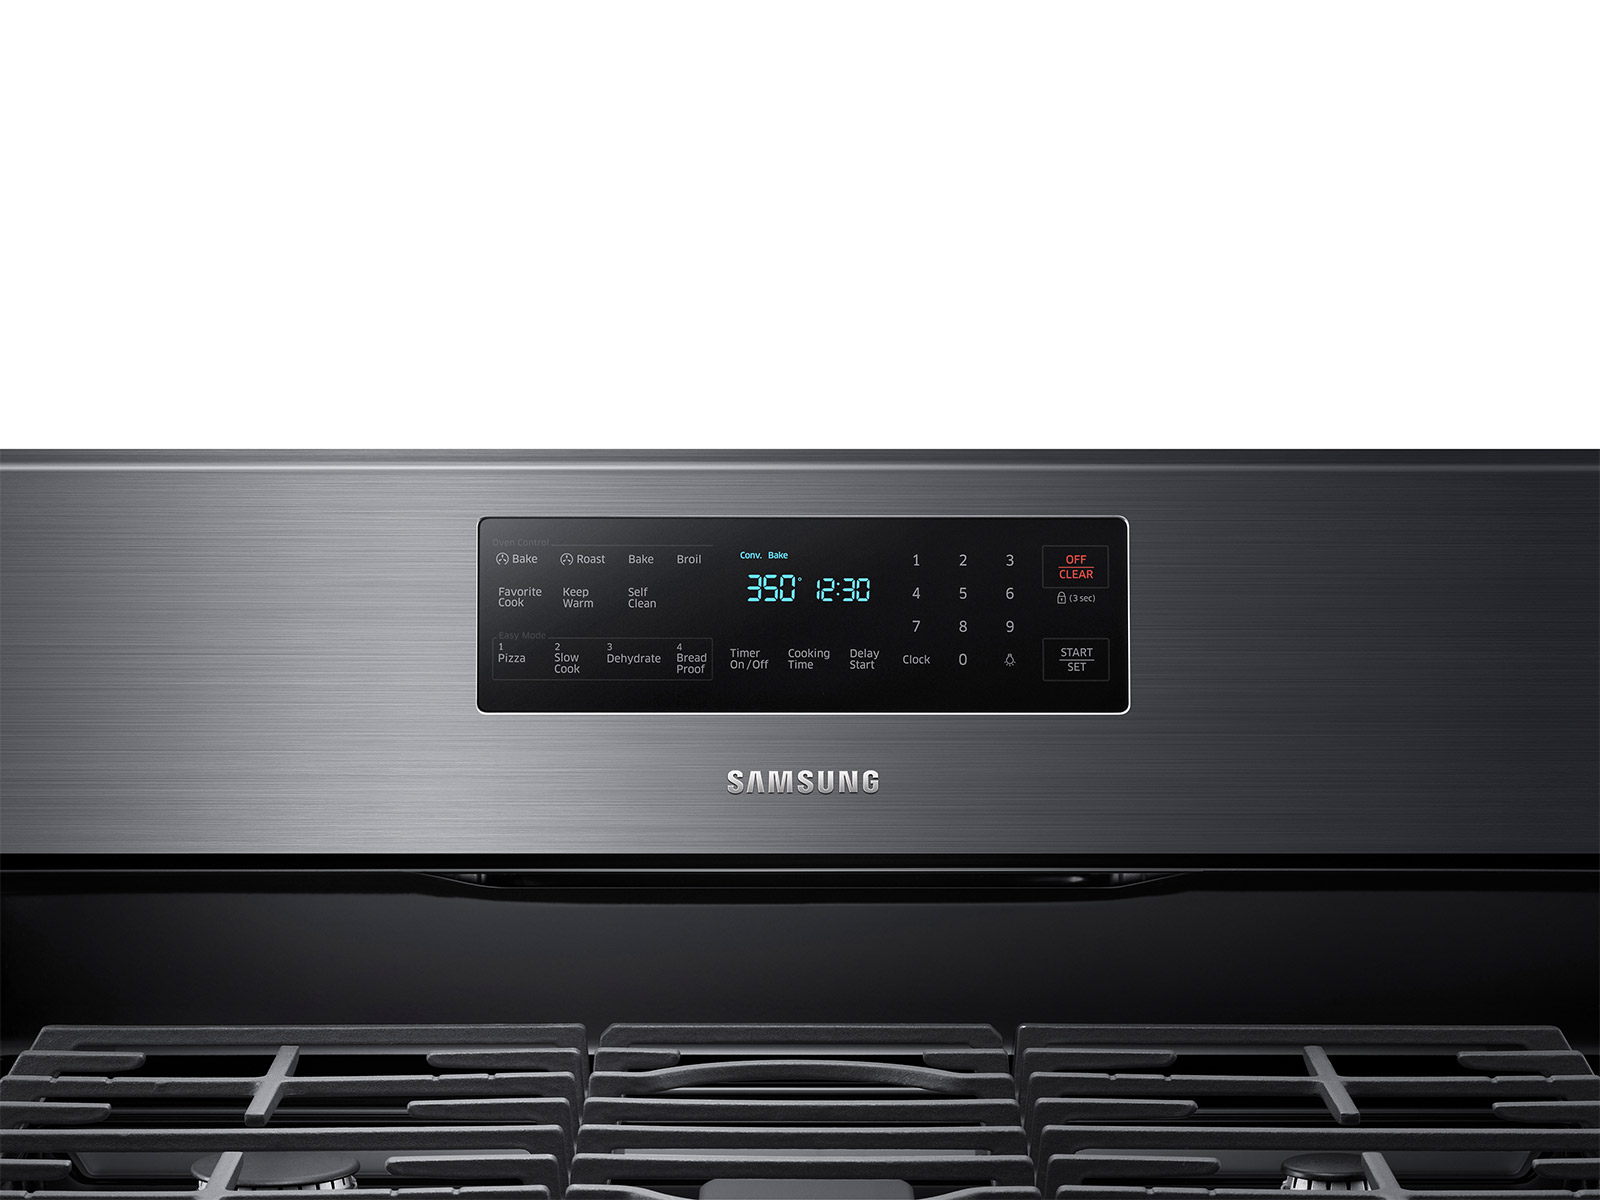 Samsung black stainless steel gas oven lets you choose how you want to bake  - CNET